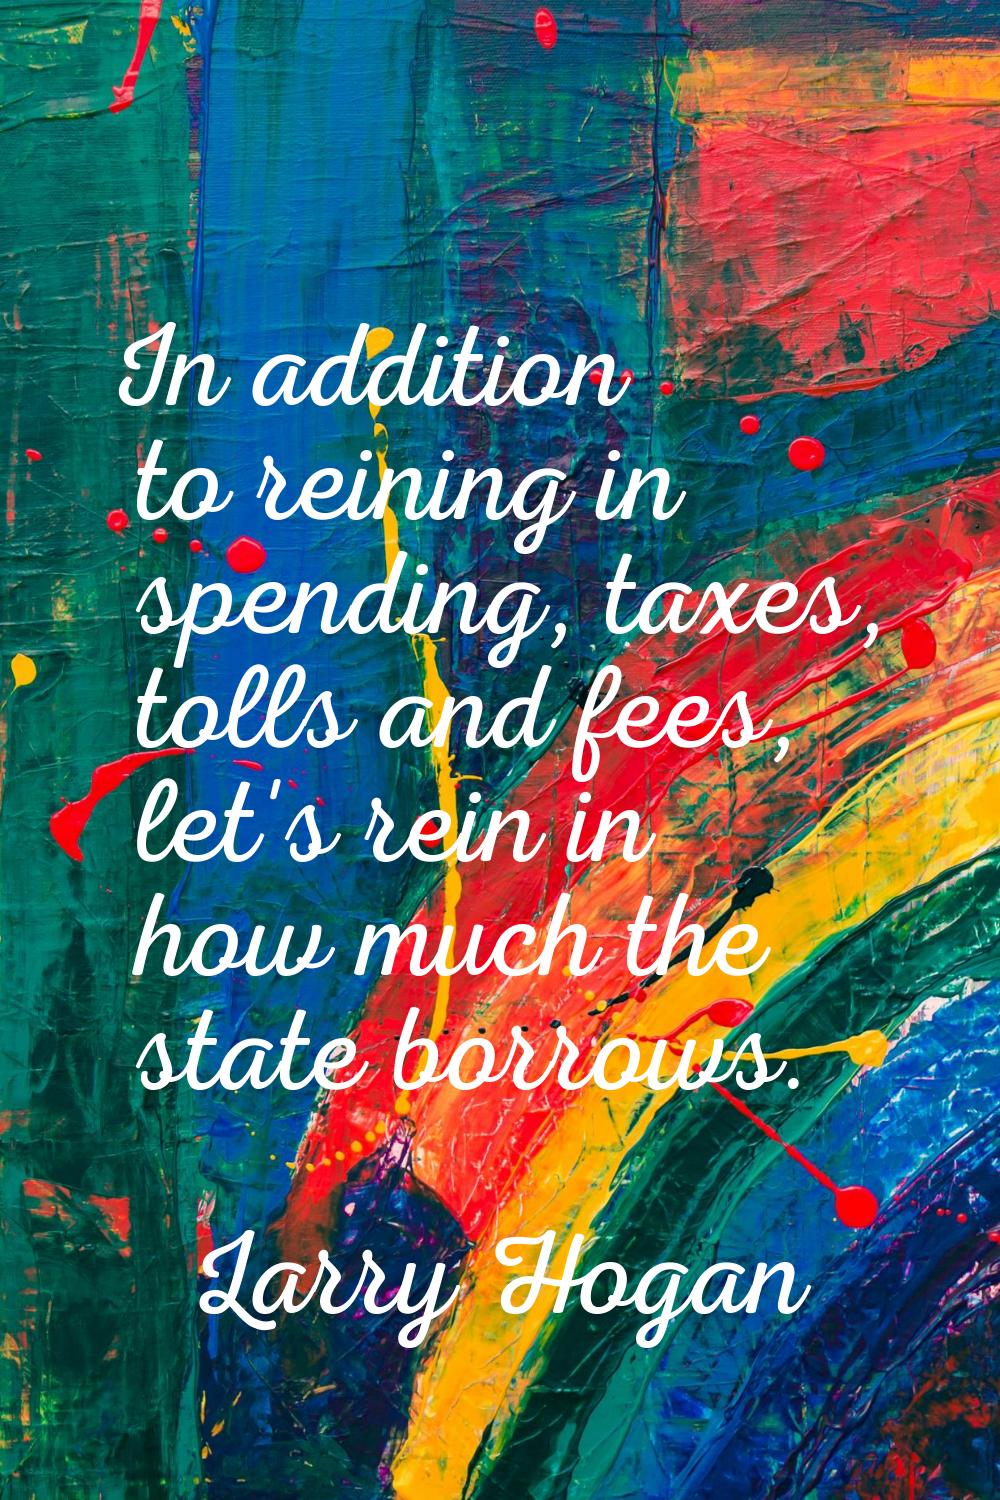 In addition to reining in spending, taxes, tolls and fees, let's rein in how much the state borrows